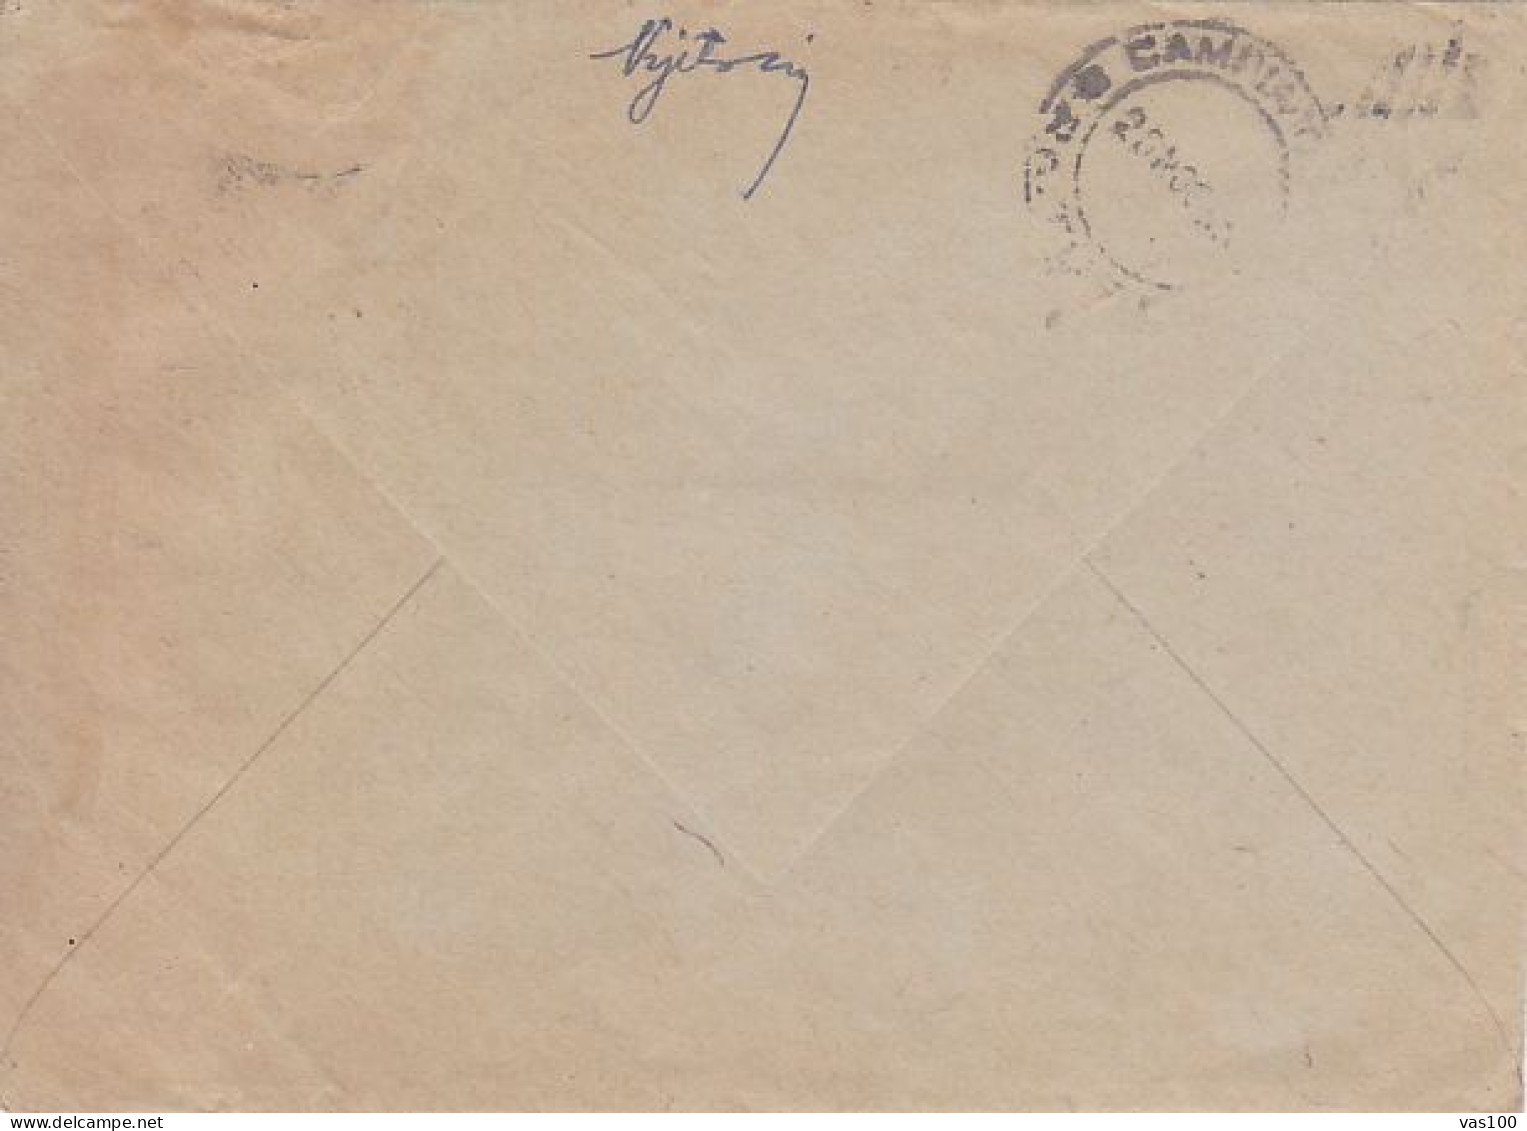 BUCHAREST YOUTH PIONEERS PALACE, STAMP ON COVER, 1951, ROMANIA - Storia Postale